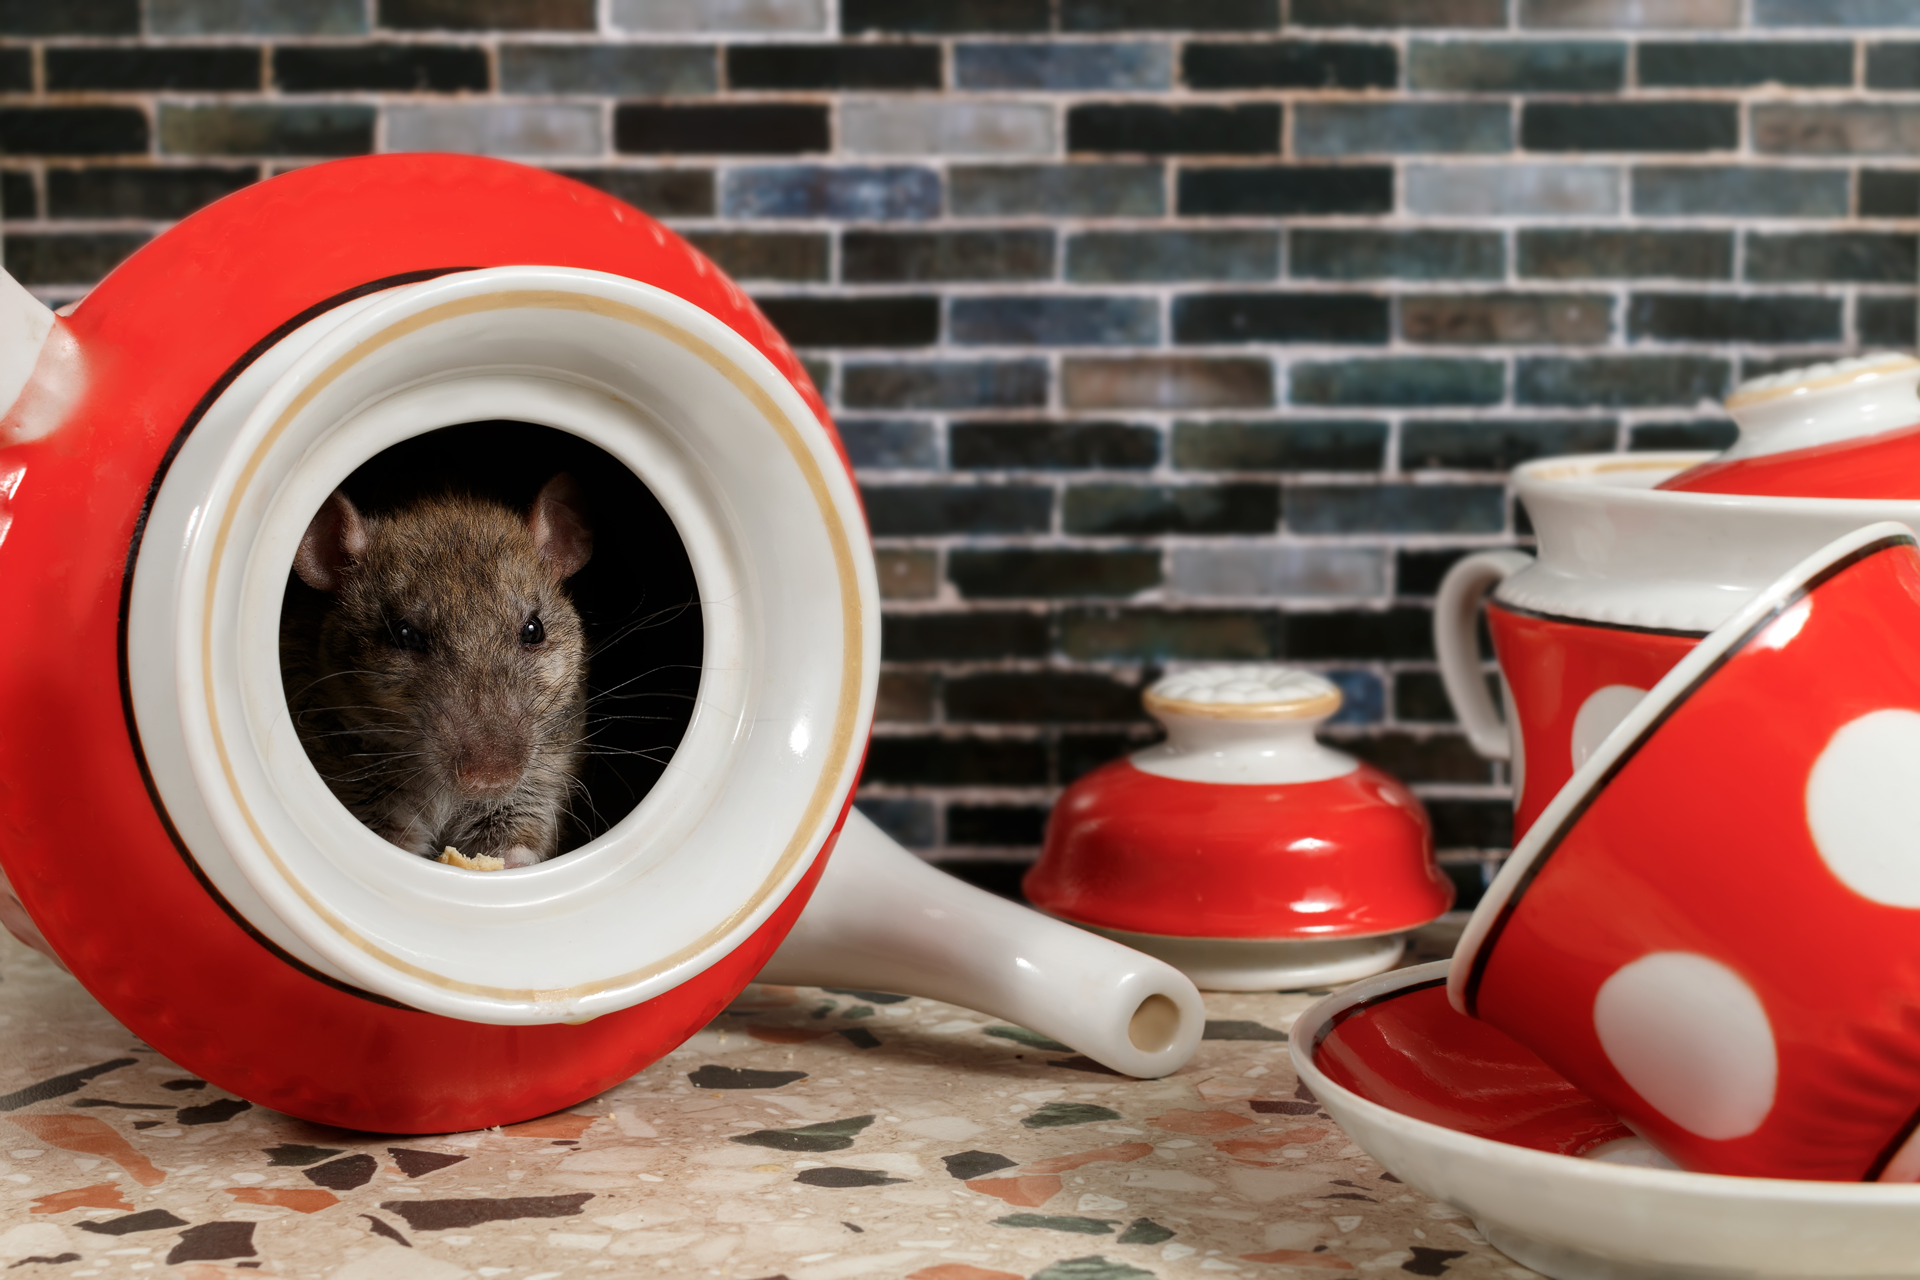 a rat is sticking its head out of a red teapot